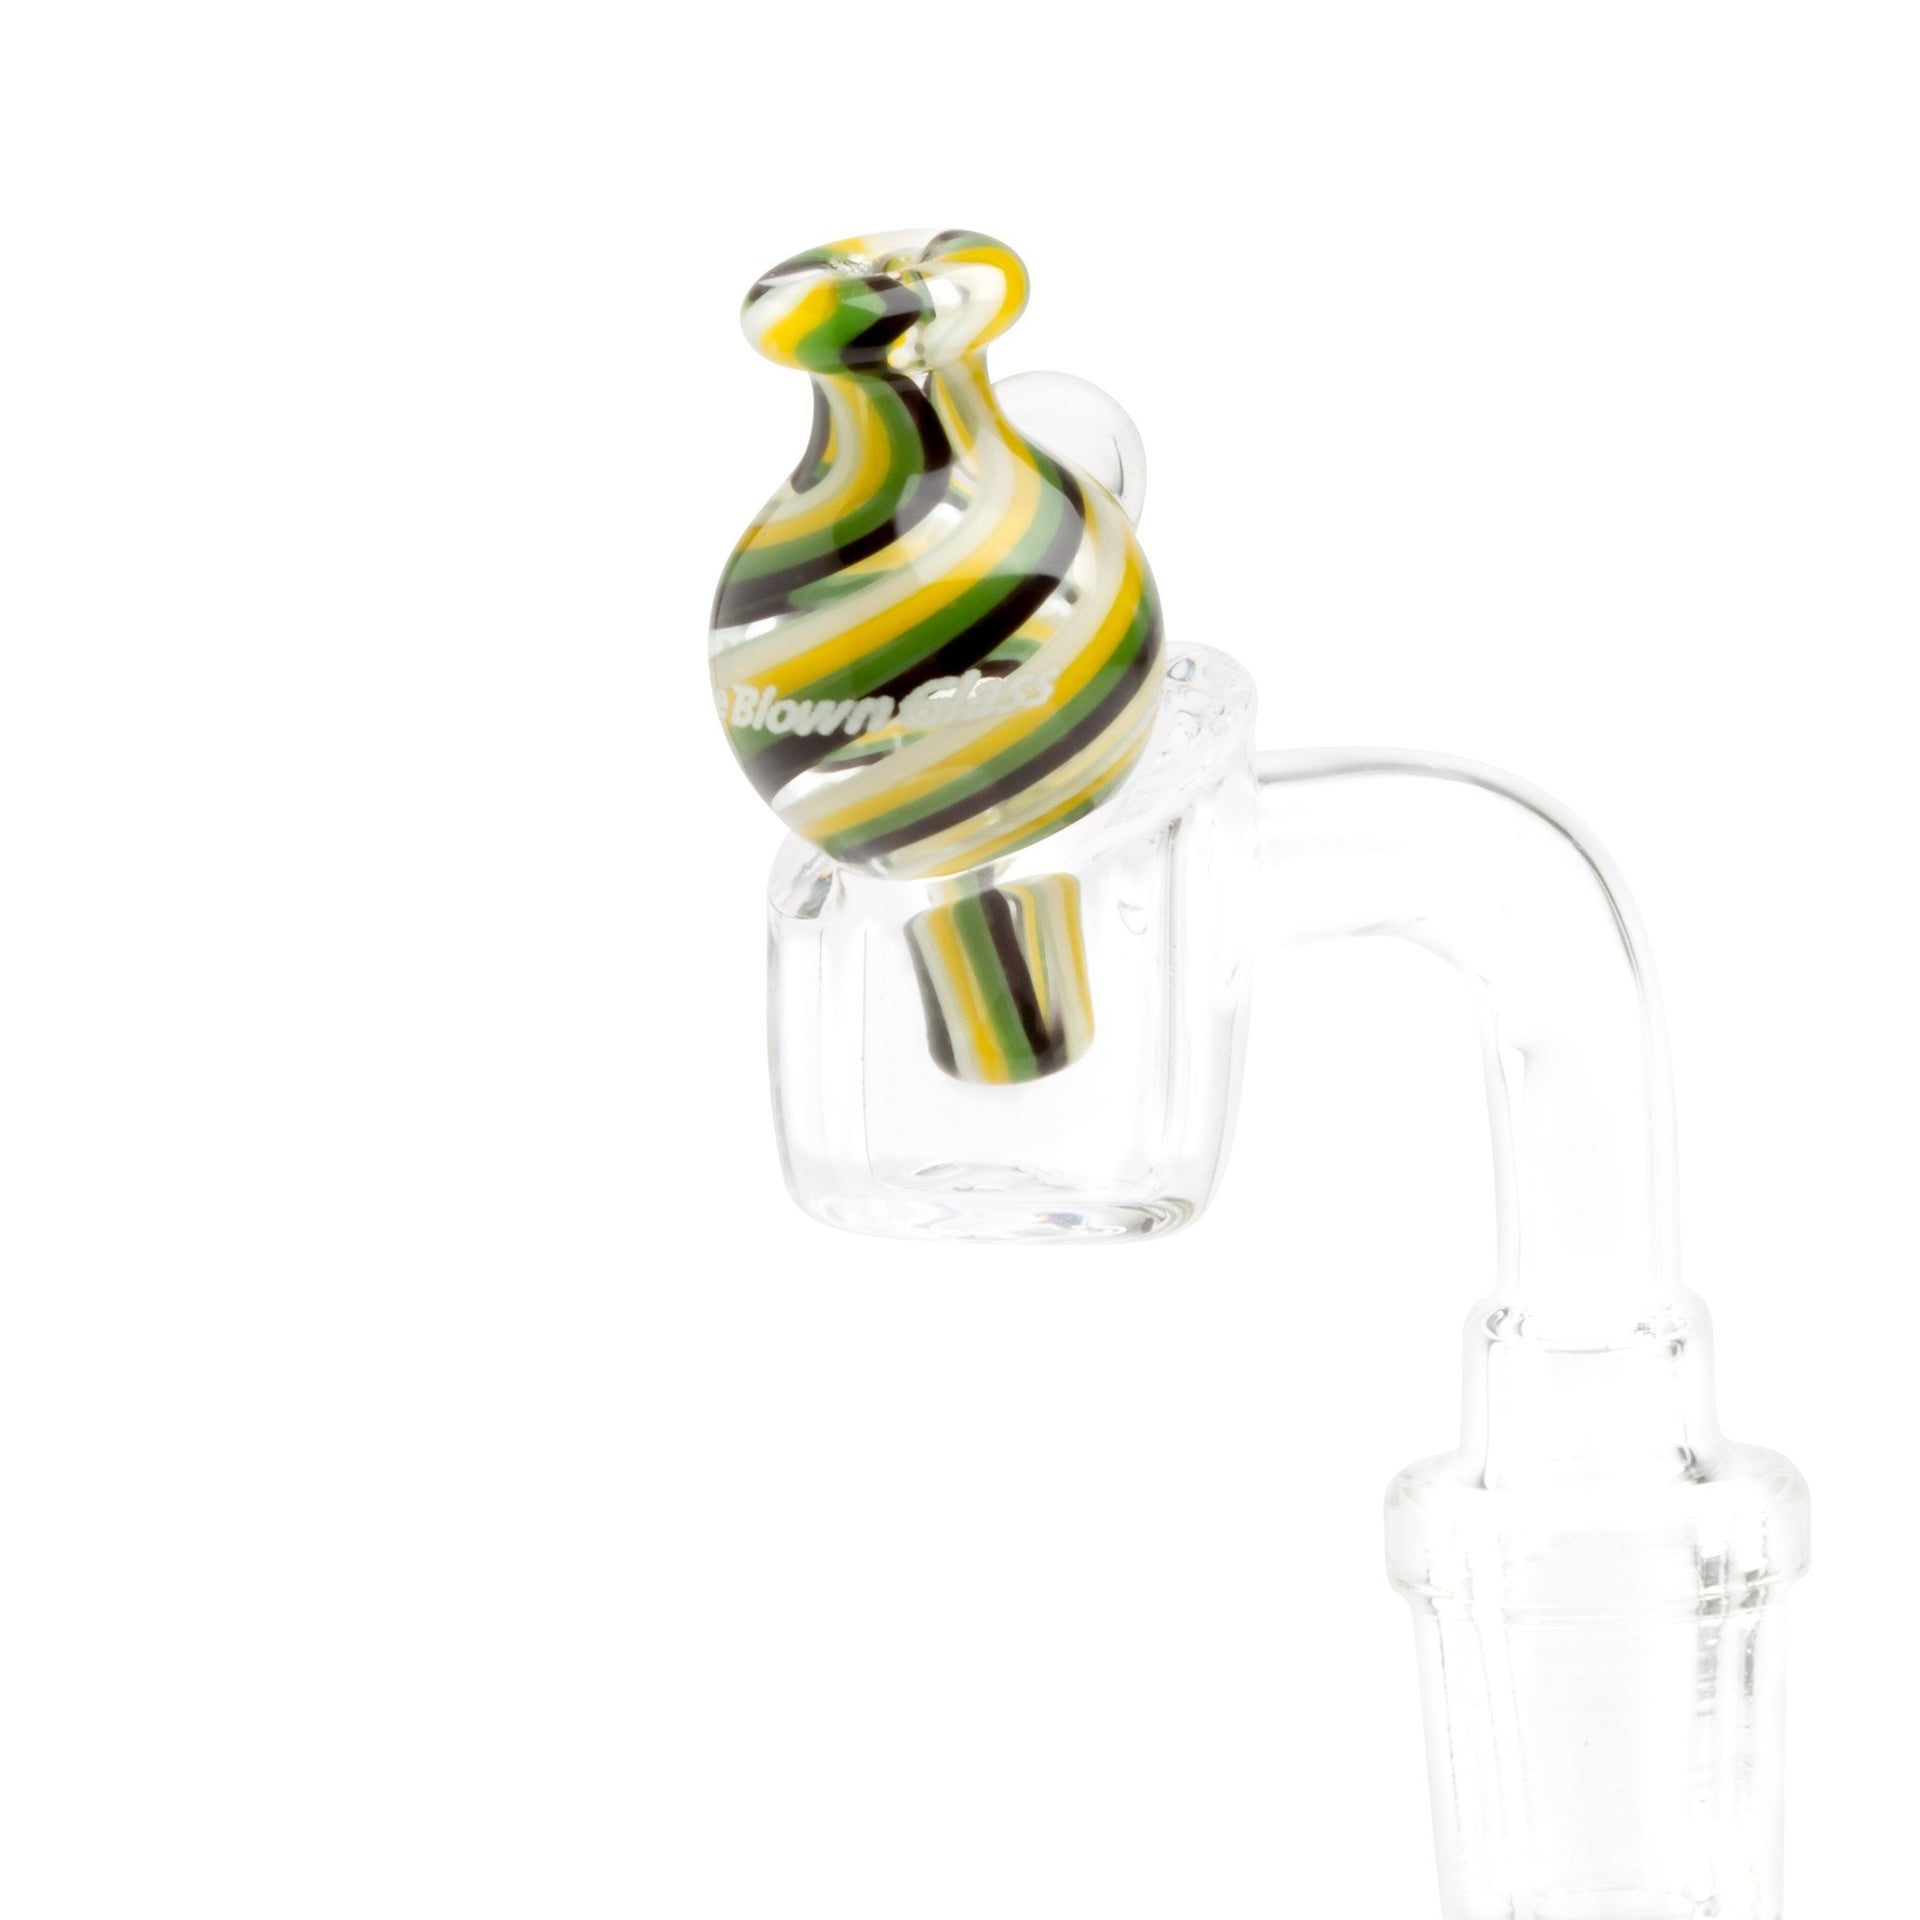 Home Blown Glass Bubble Carb Cap - Ashanti - 420 Science - The most trusted online smoke shop.